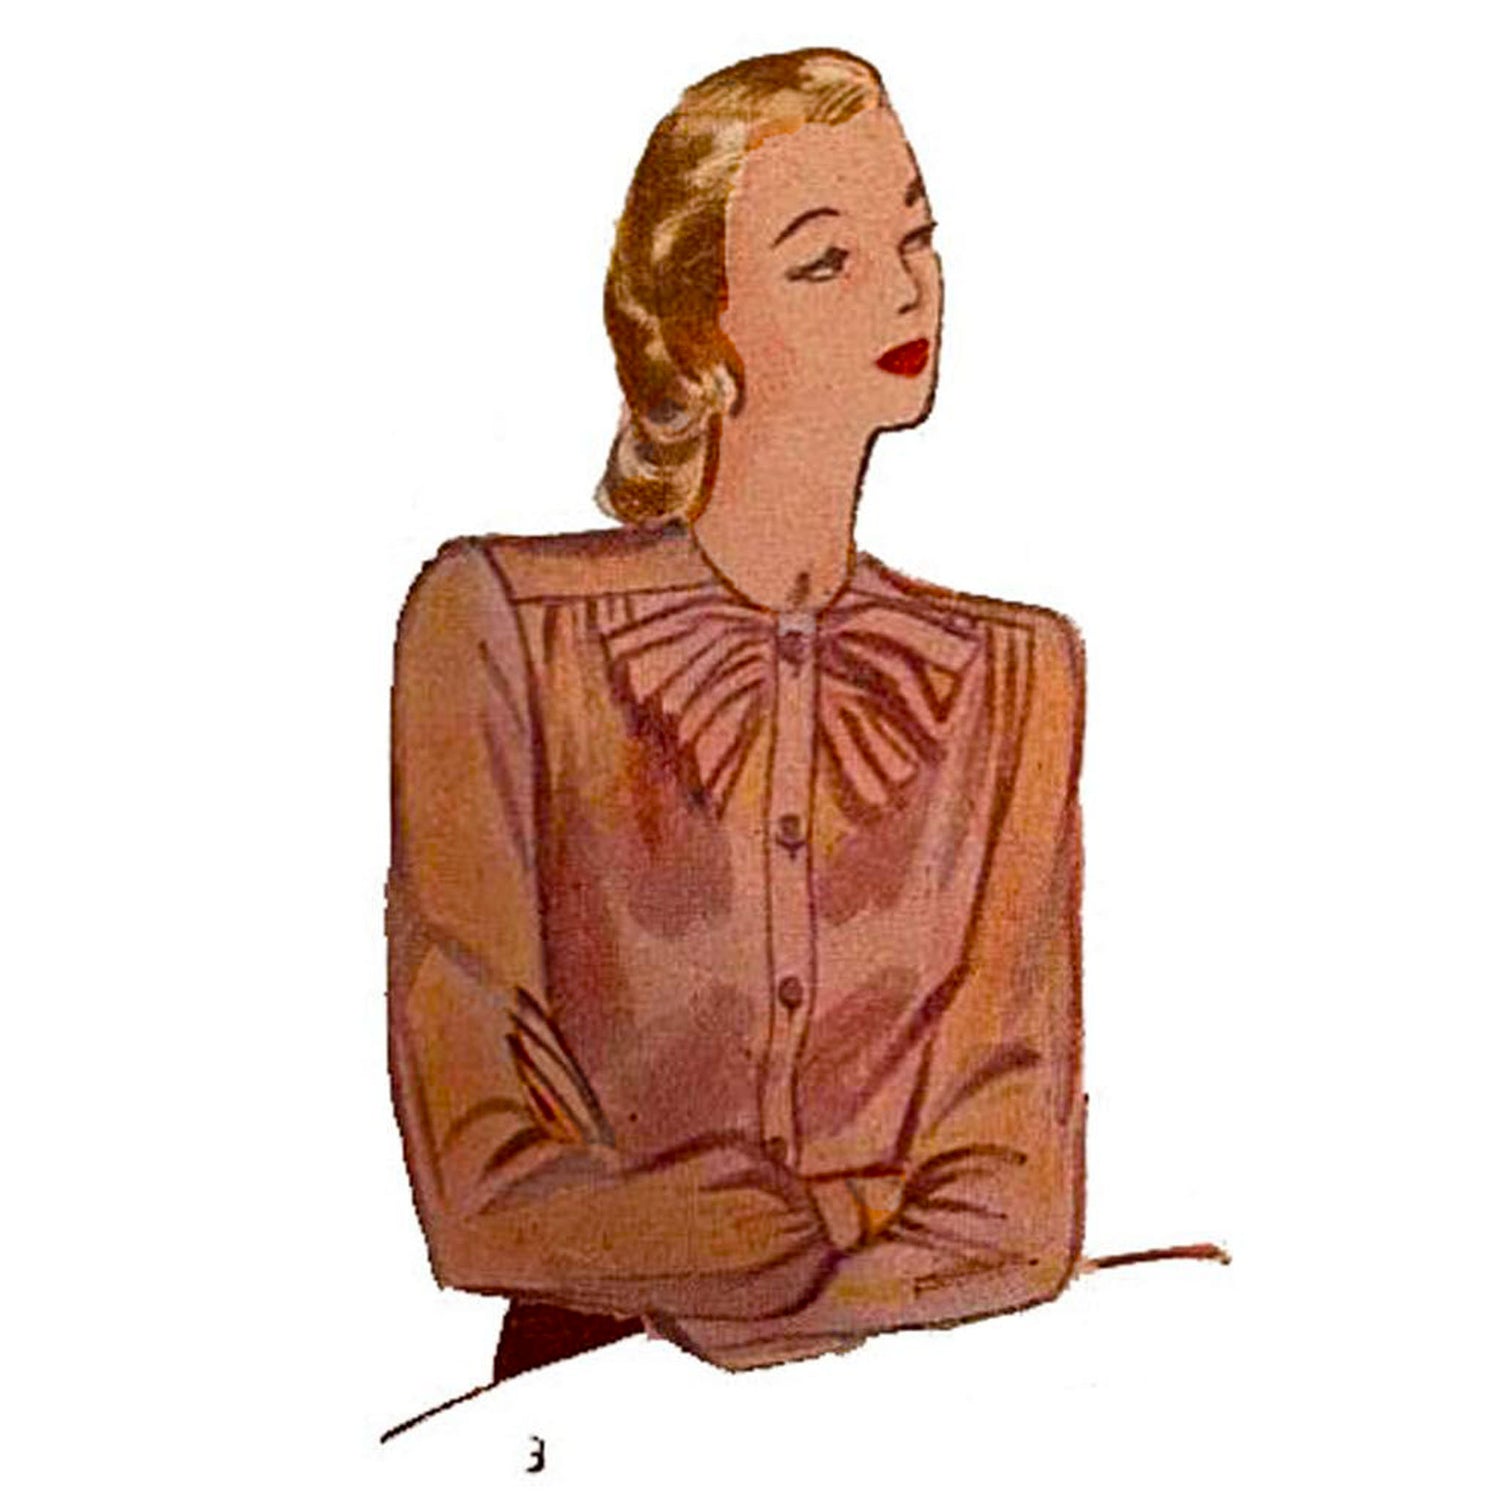 Model wearing 1940s women’s blouse made from Simplicity 1170 pattern